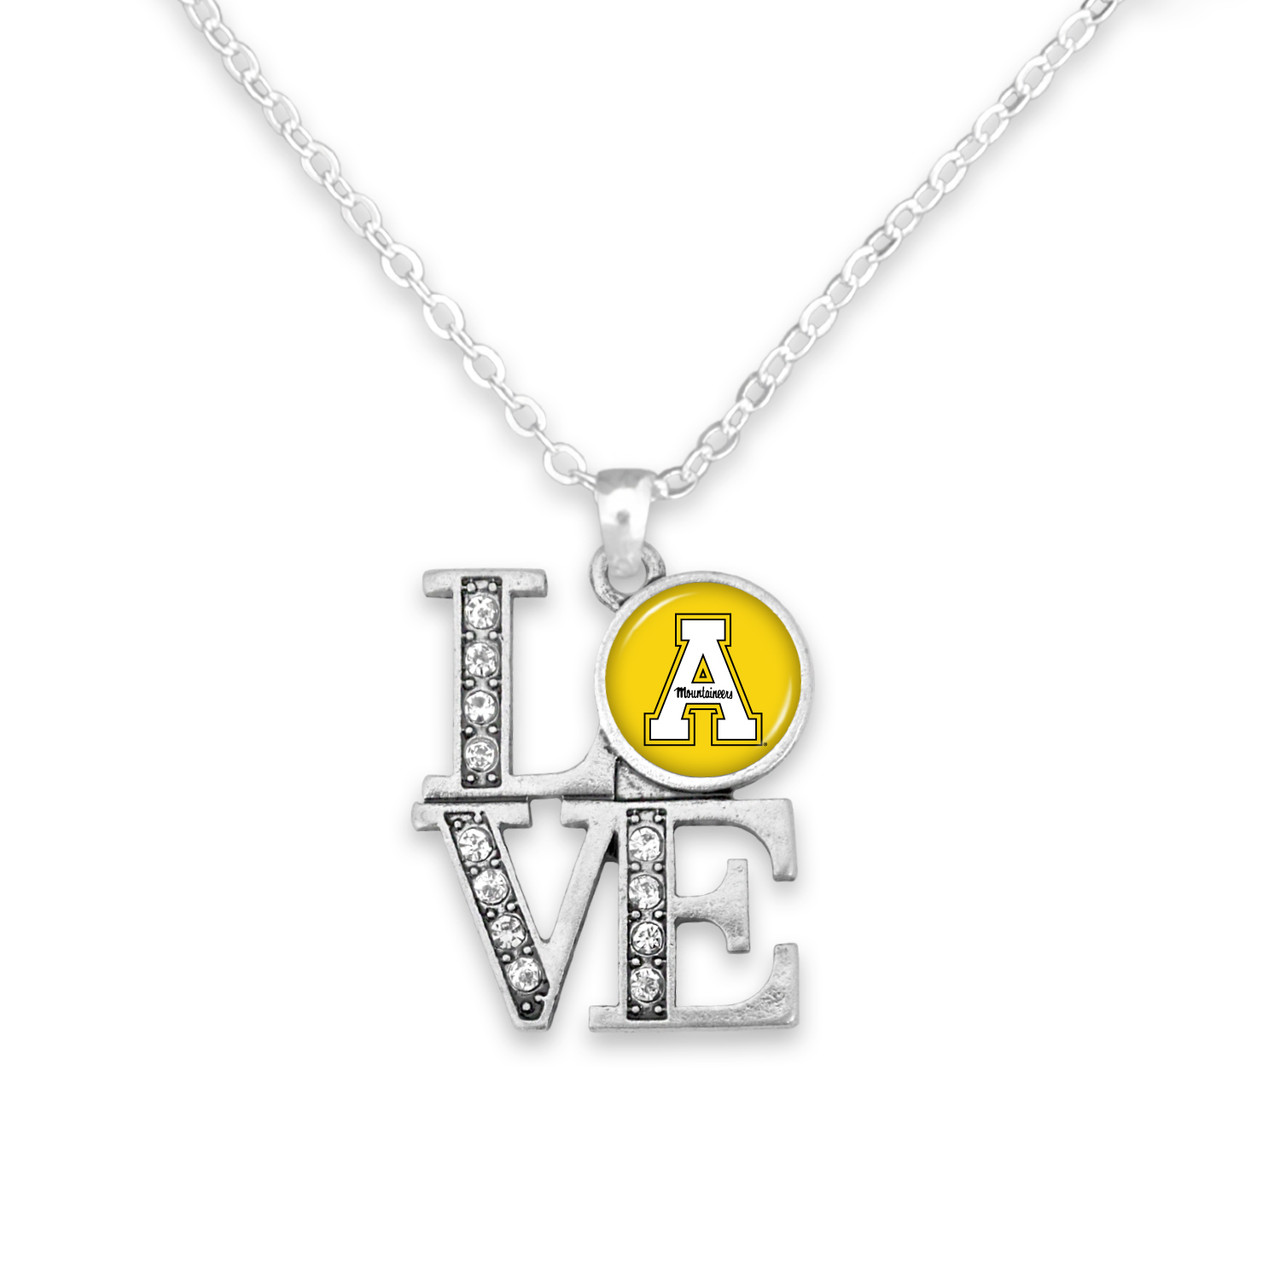 Appalachian State Mountaineers Necklace- LOVE